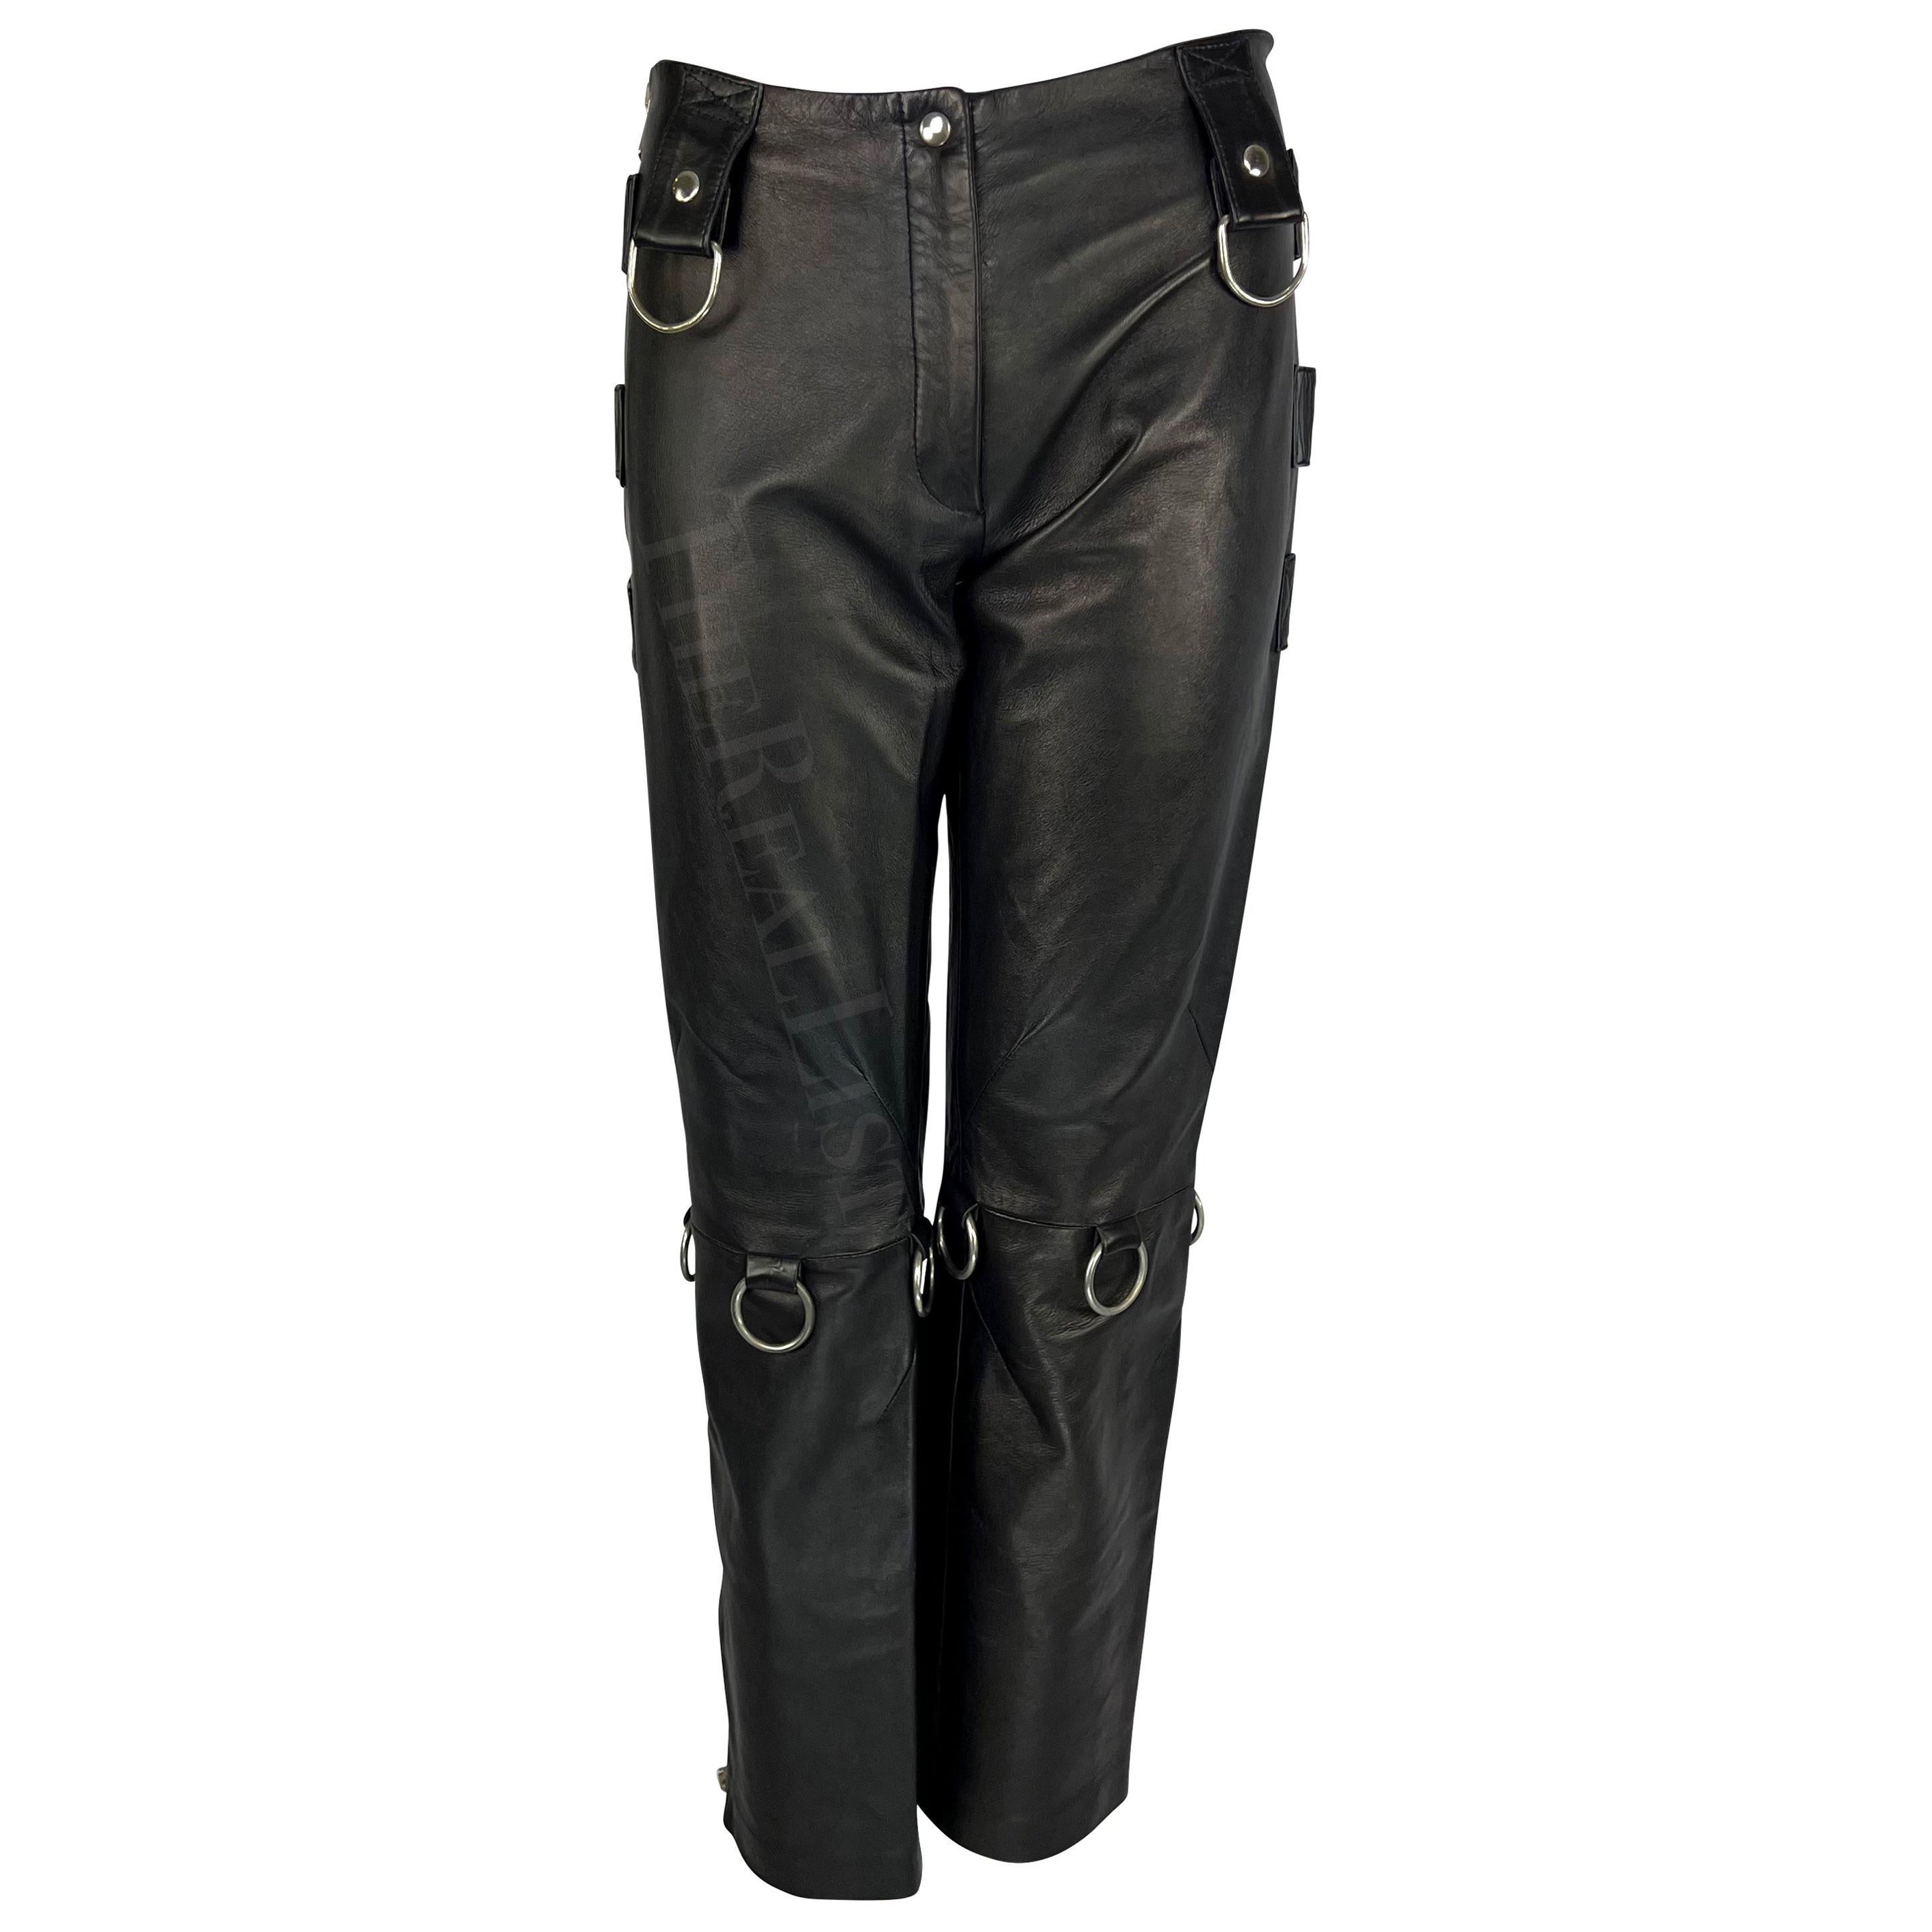 S/S 2000 Dolce & Gabbana Aaliyah Runway Black Leather Zipper Ring Moto Pants For Sale